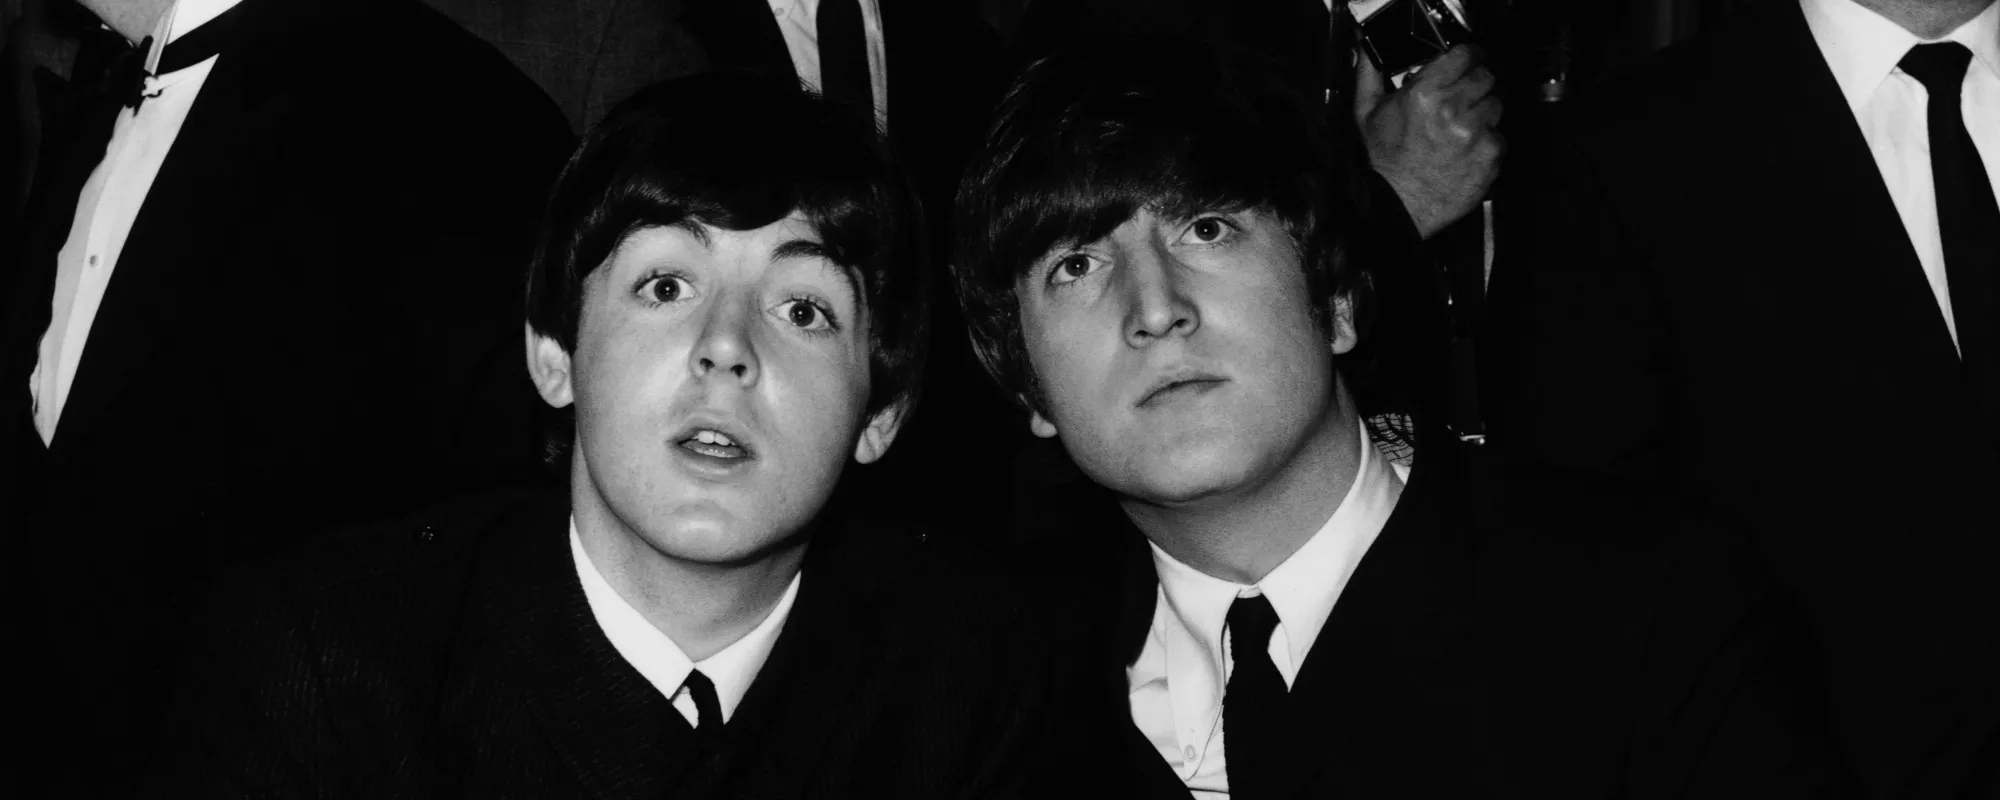 The Beatles ‘Revolver’ to Get “Immersive” Rerelease, Says Giles Martin